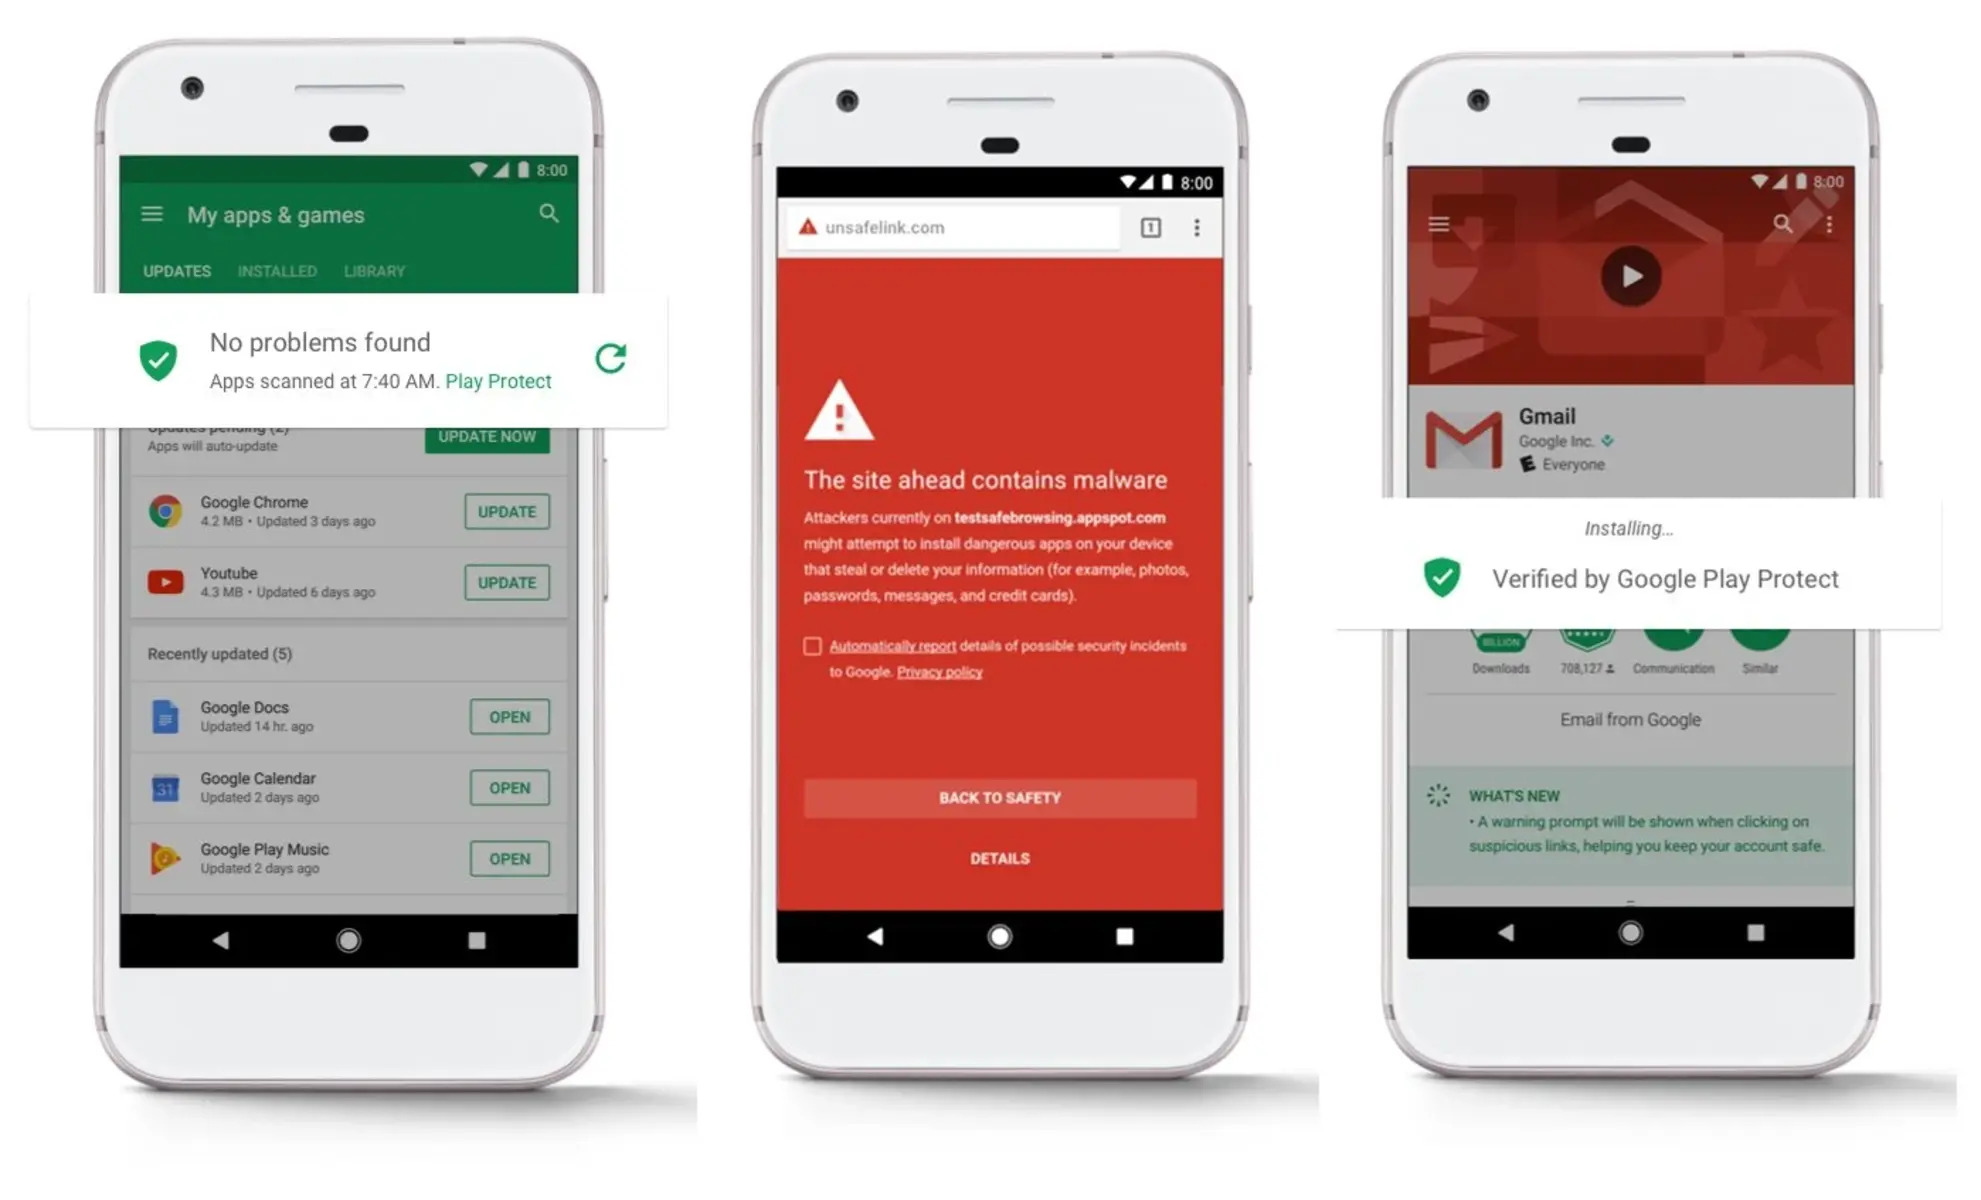 What Is Google Play Protect And How Does It Work?